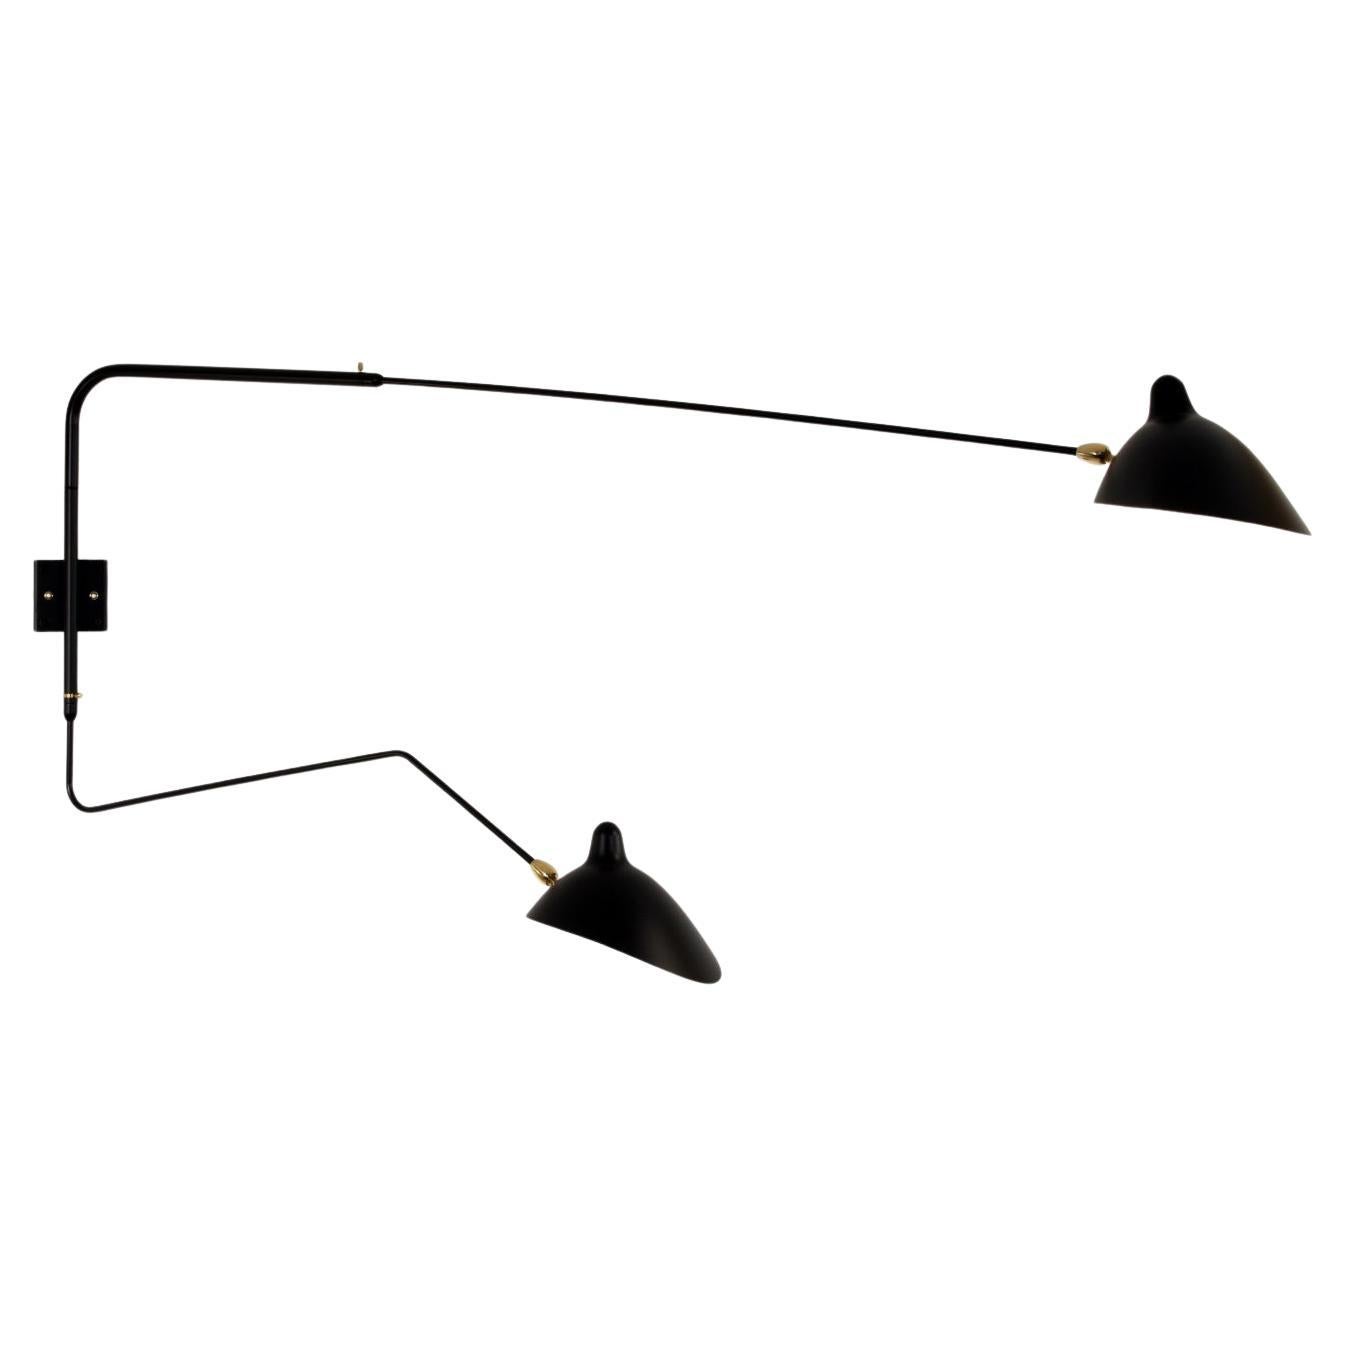 Serge Mouille - Rotating Sconce with 2 Arms (1 Curved) in Black